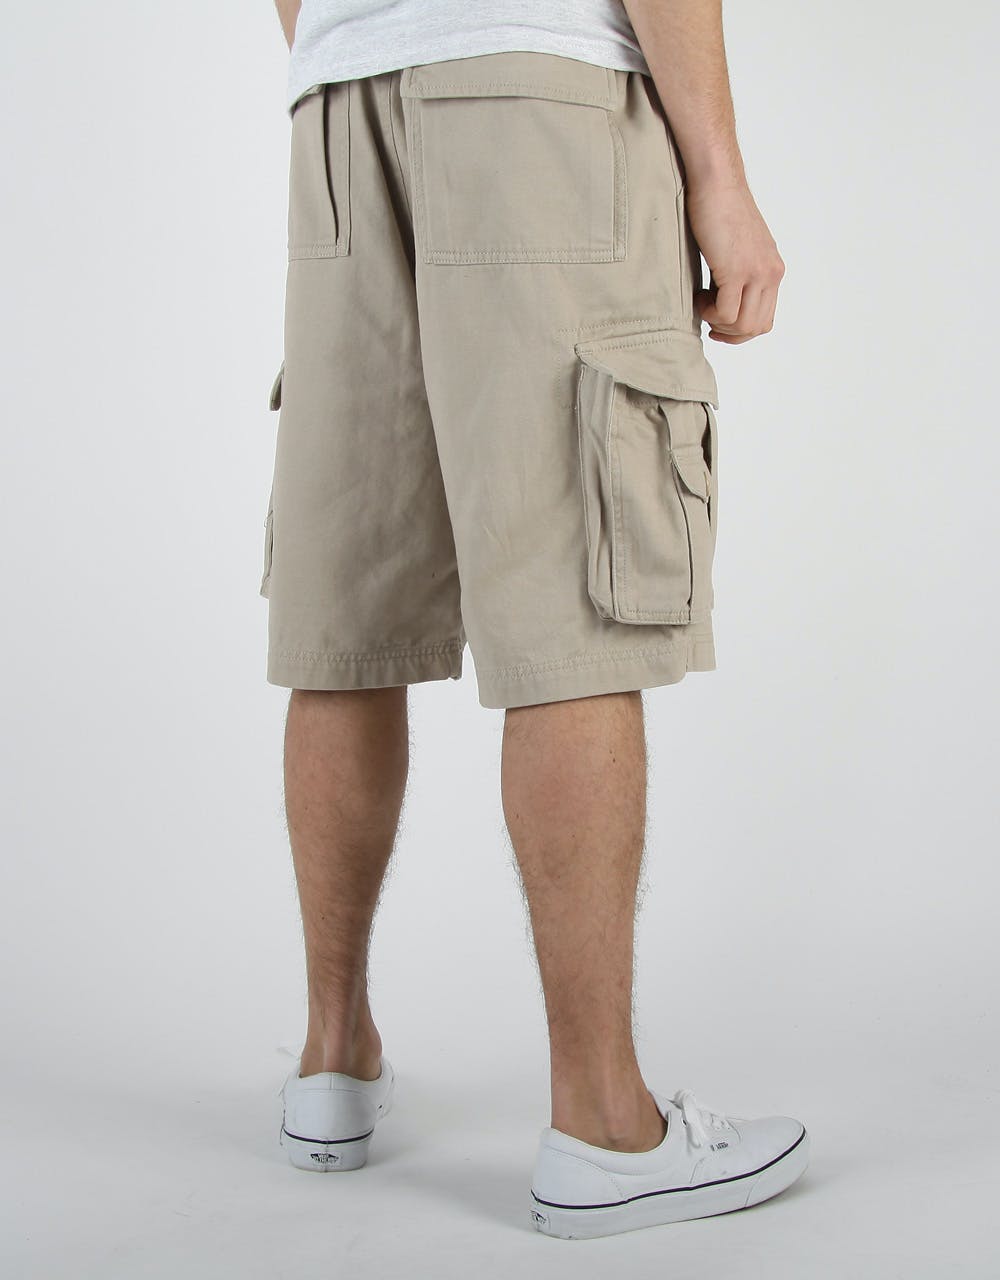 Route One Cargo Shorts - Beige